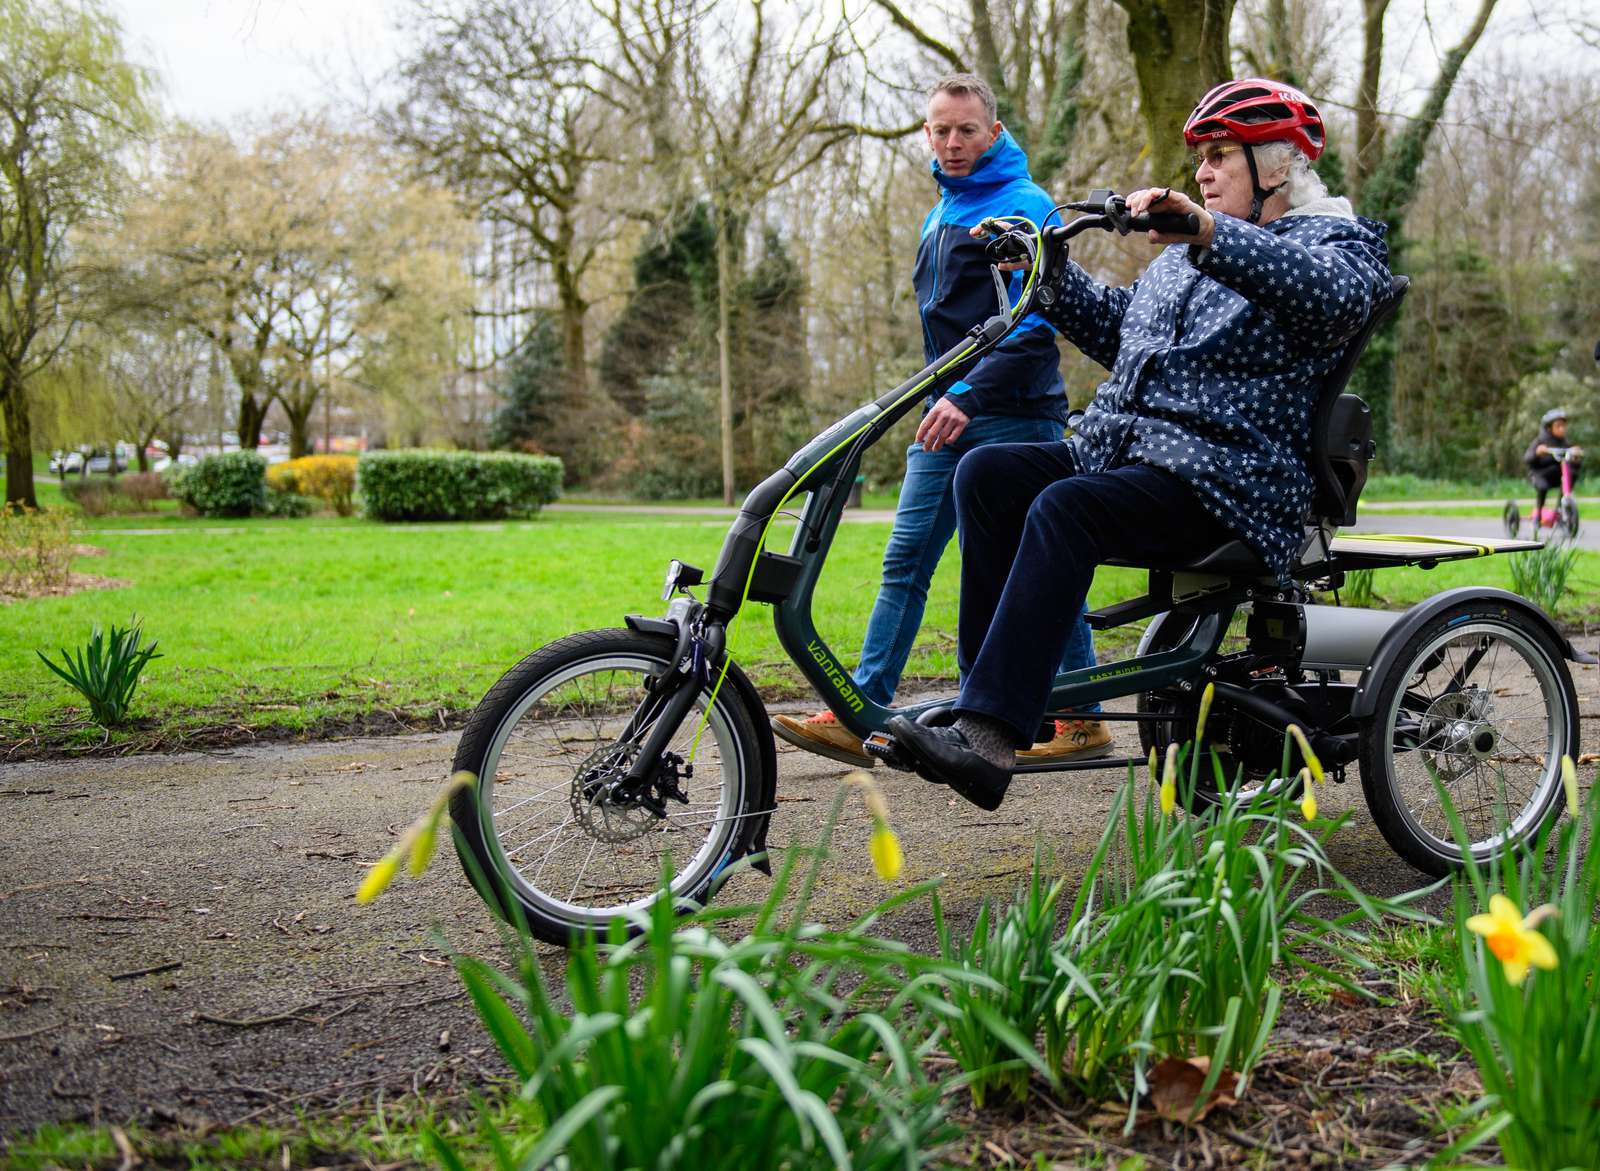 Cycling UK's Ross Adams walks beside a participant as she rides an e-trike through Debdale Park, Manchester on March 21 2023. Public event took place to mark the launch of Cycling UK's new e-cycle scheme, Making cycling e-asier, at Wheels for All.